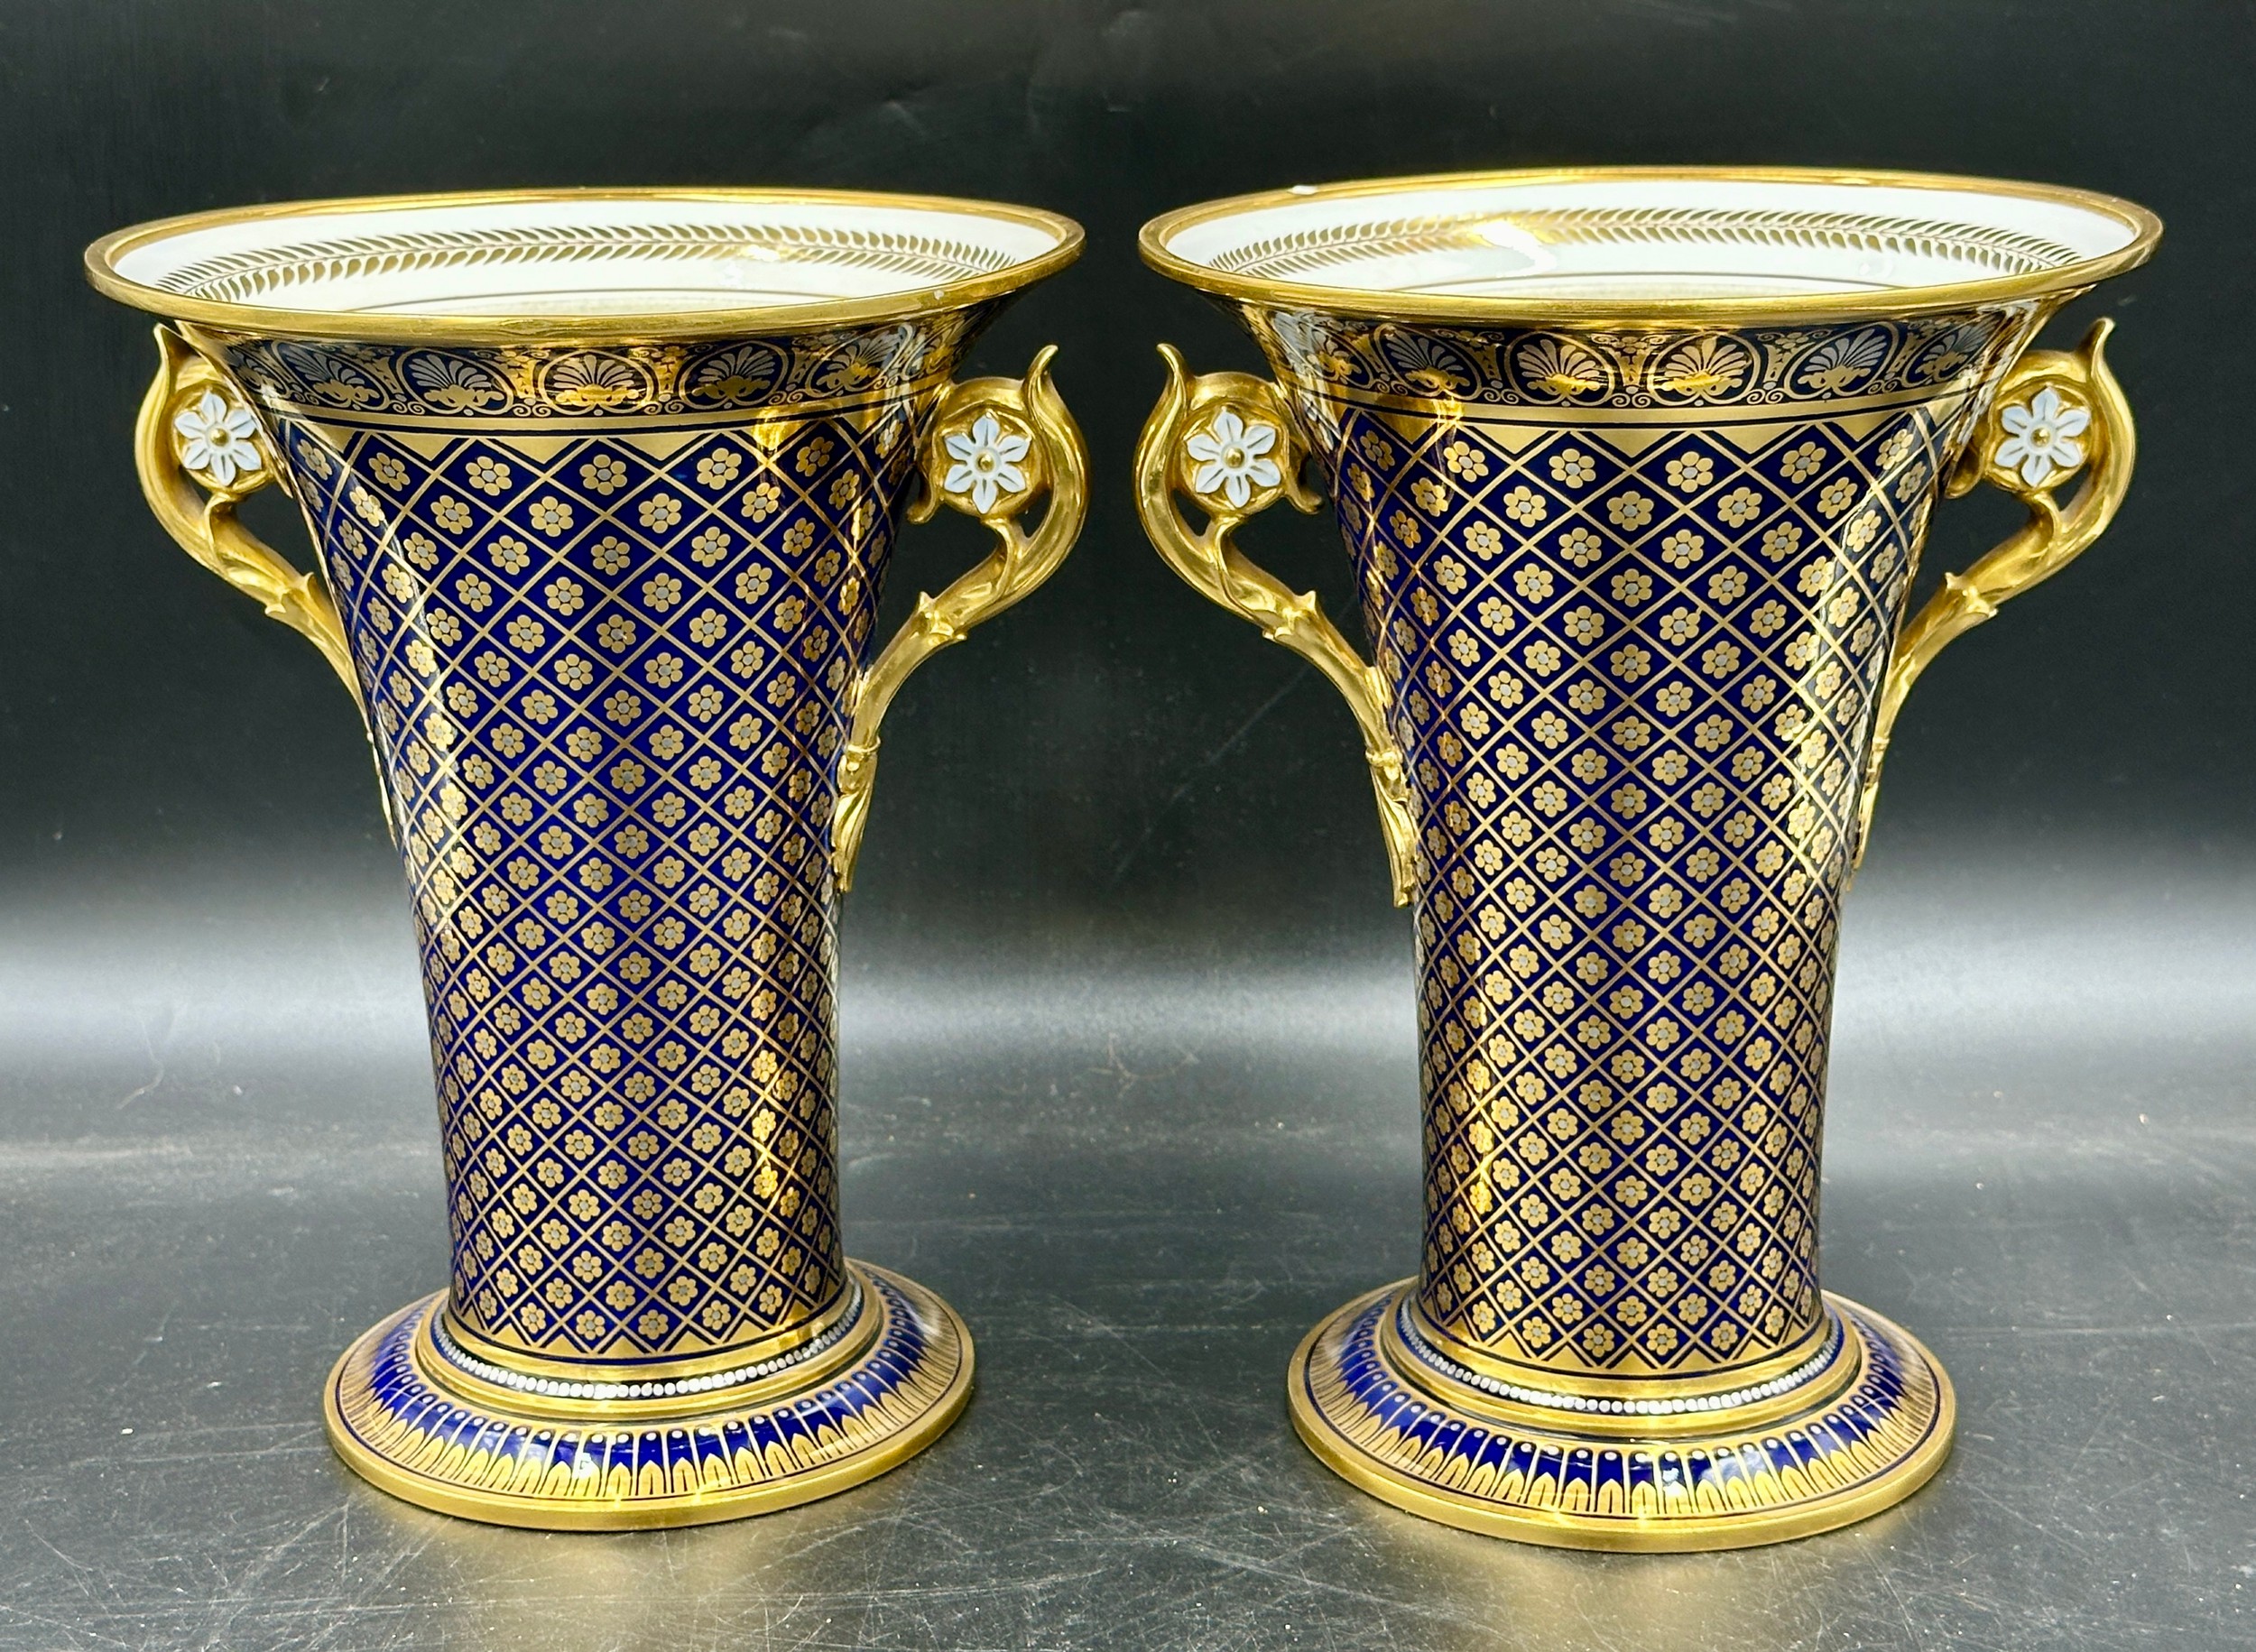 Two twin handled vases with gilt decoration on a blue ground. Marks to base - Sevres 1838, one with